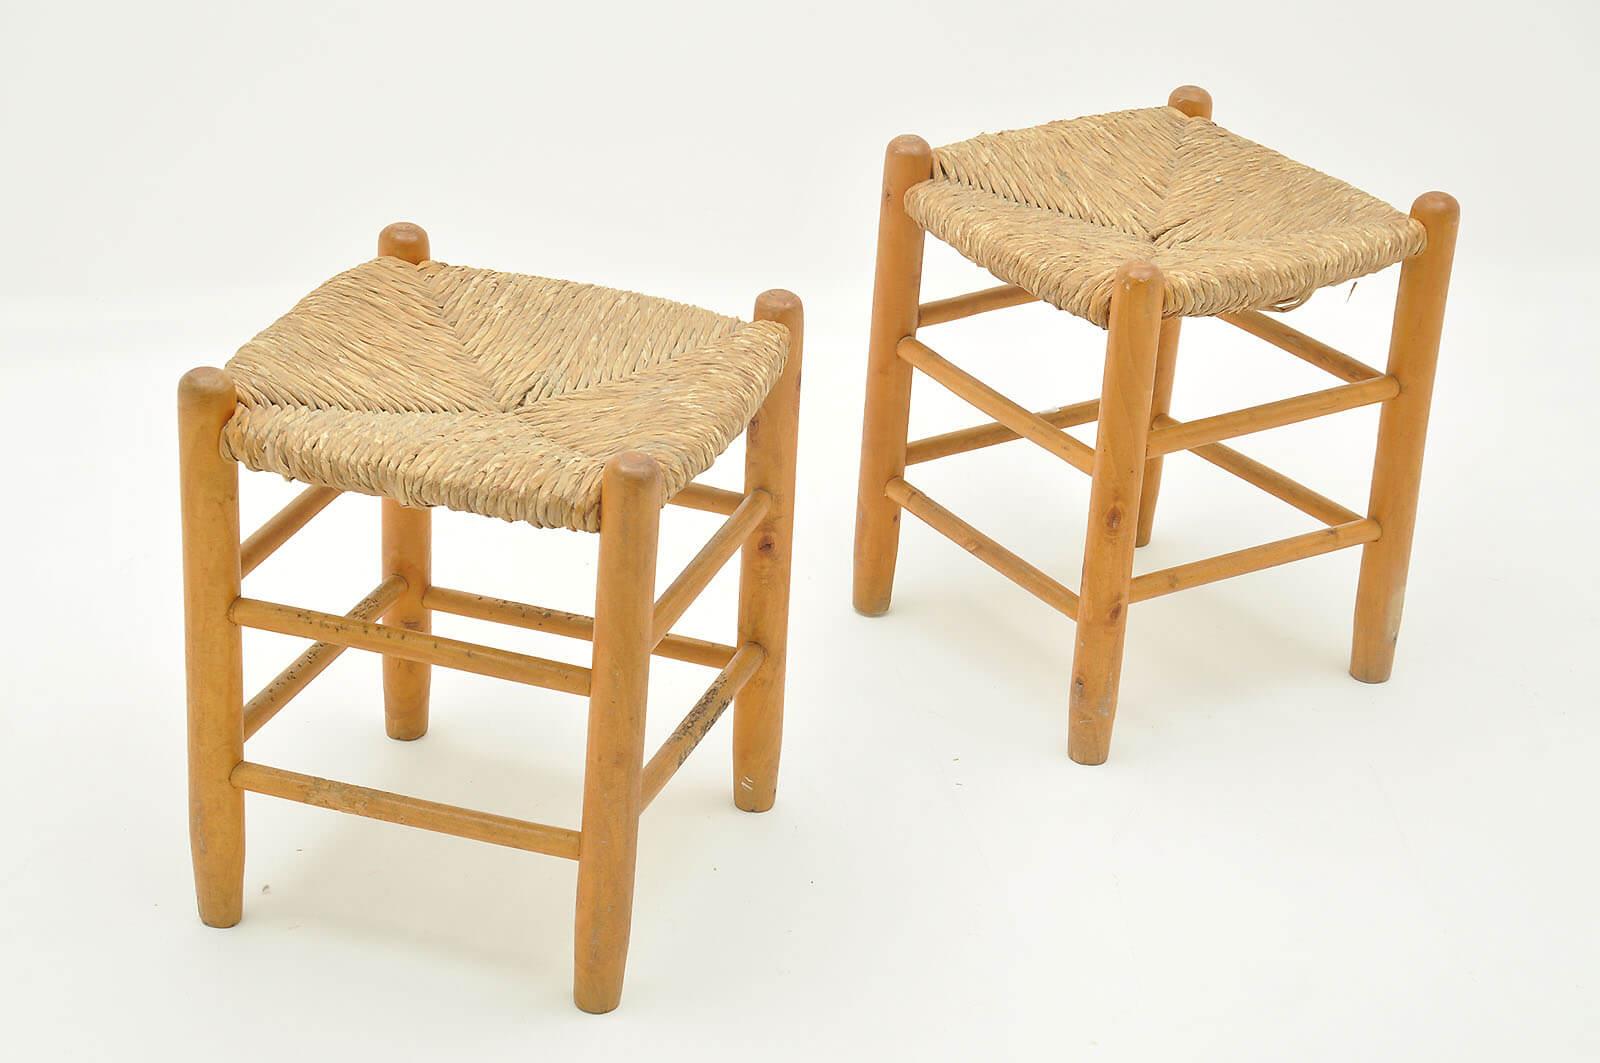 Pair of Wood and Staw Stools by Charlotte Perriand for L'équipement de la Maison 5